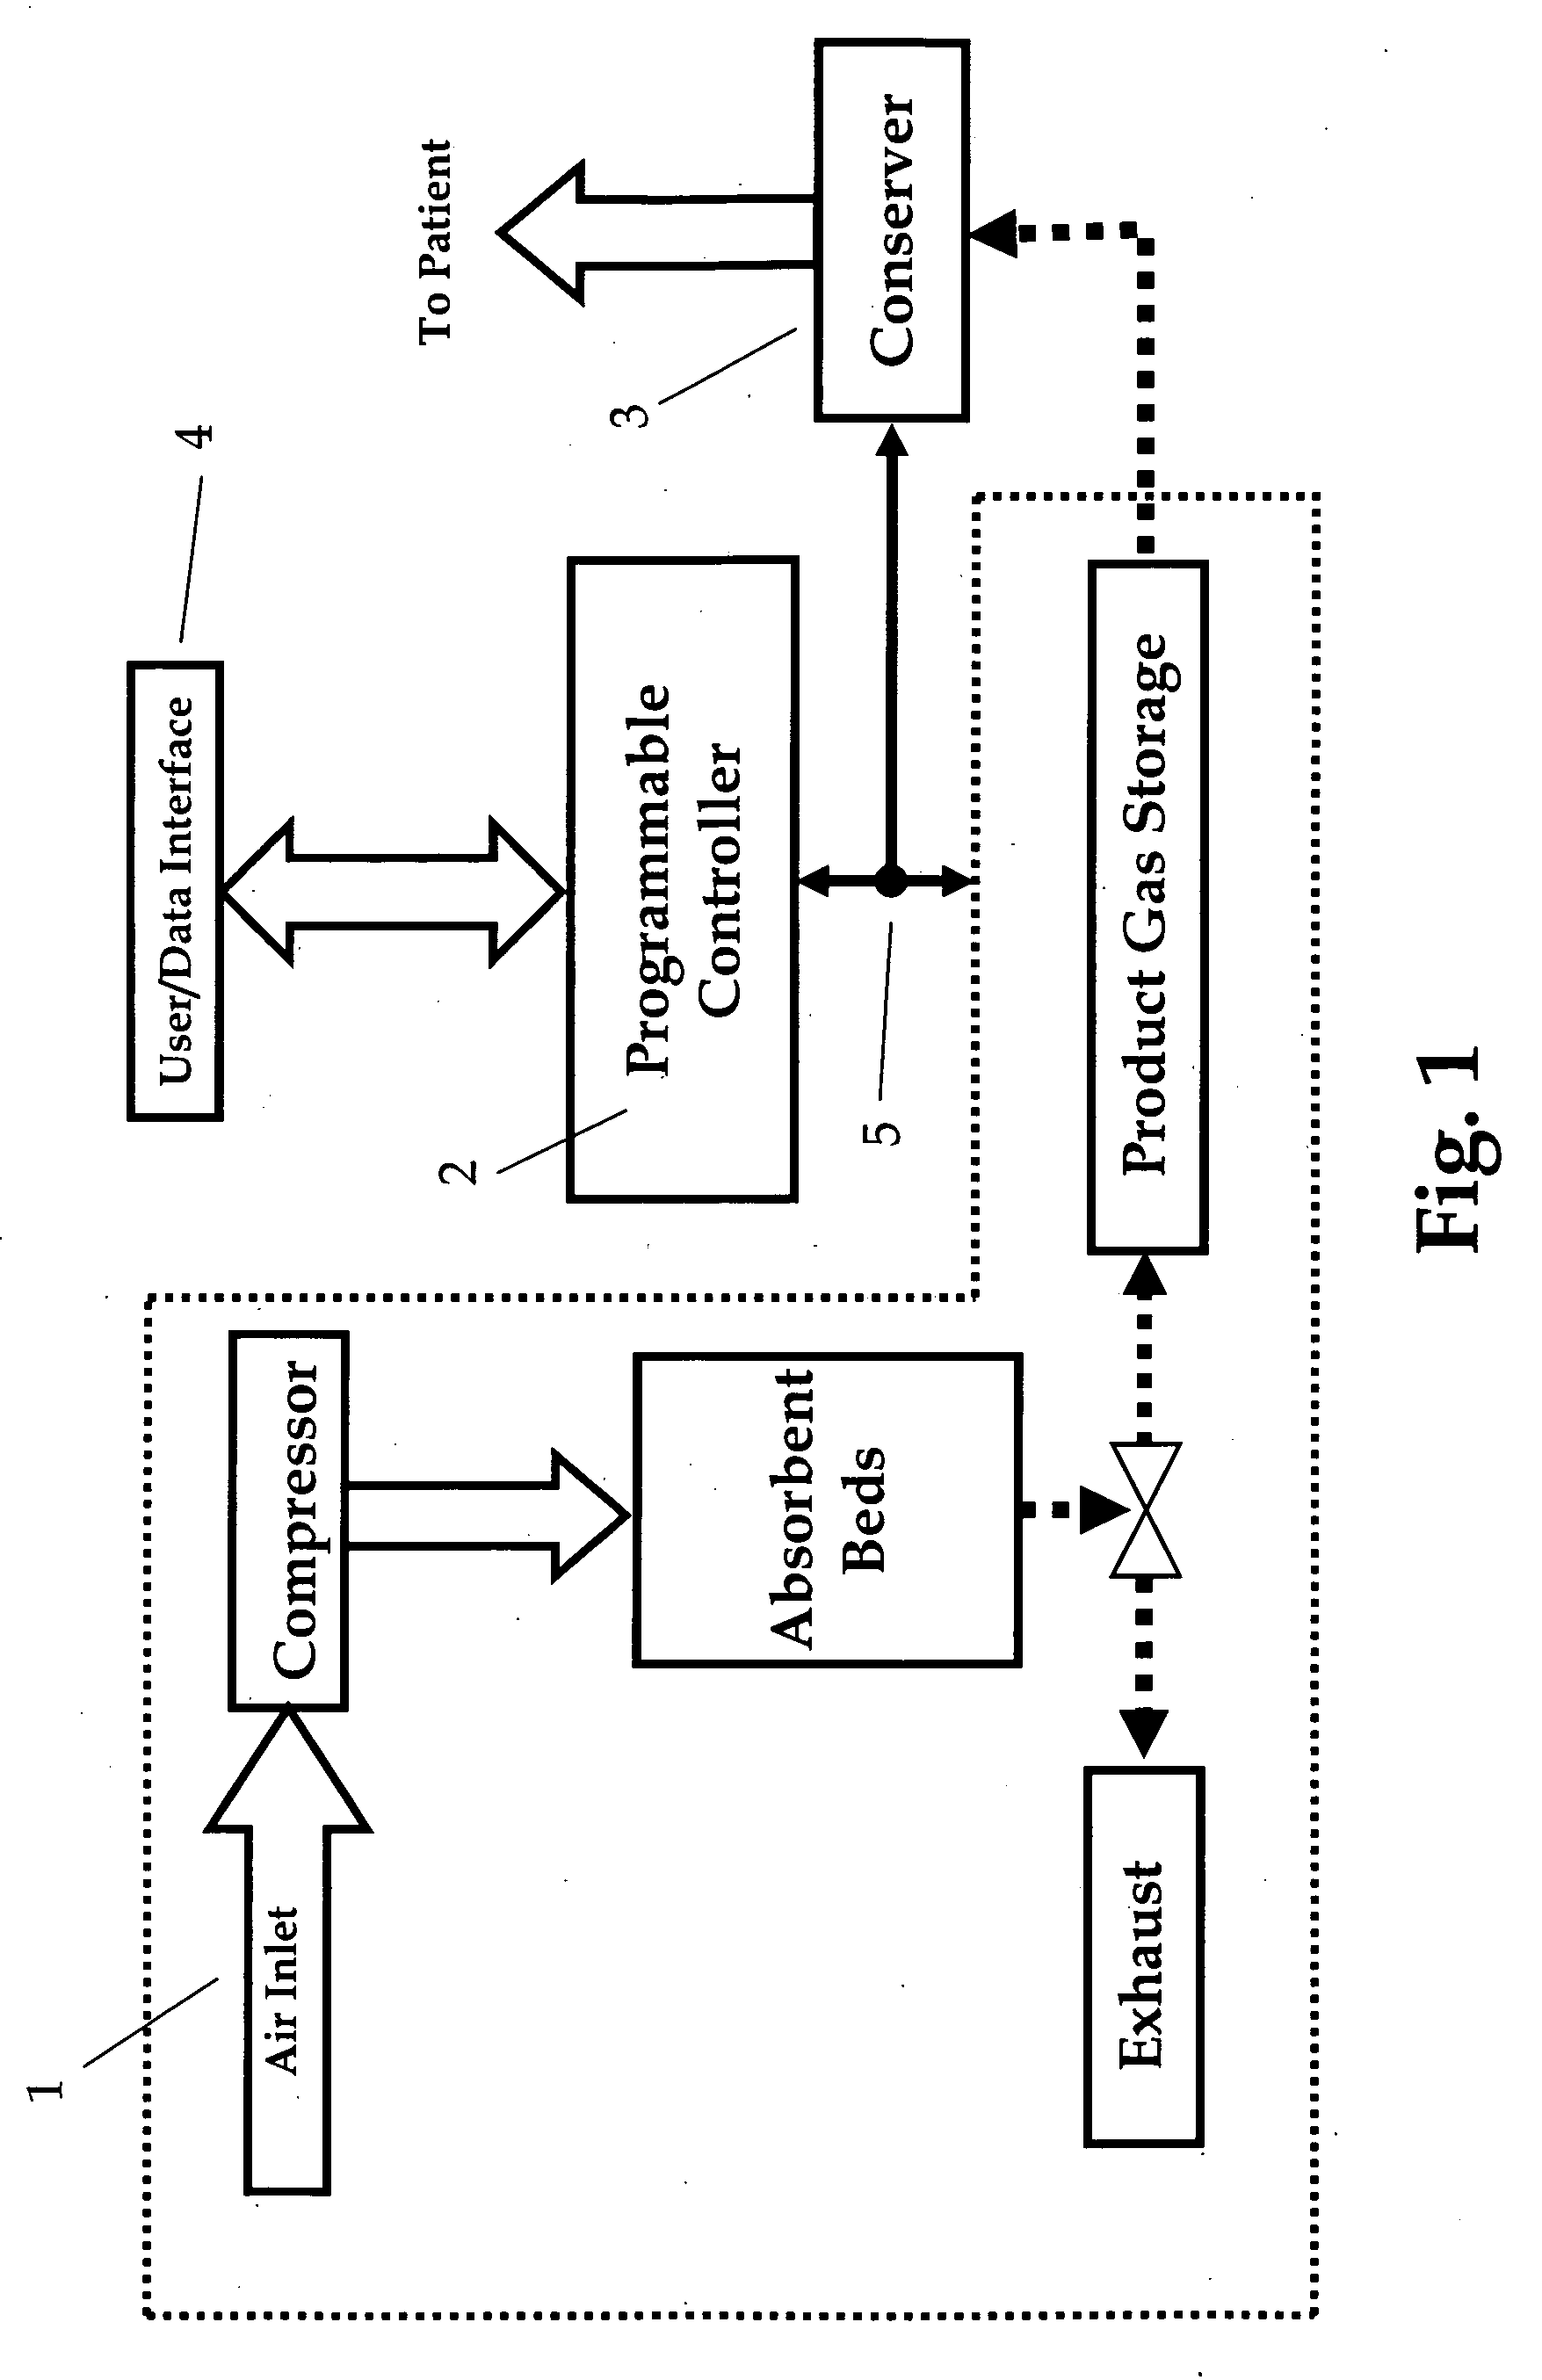 In-home medical data collection and reporting system